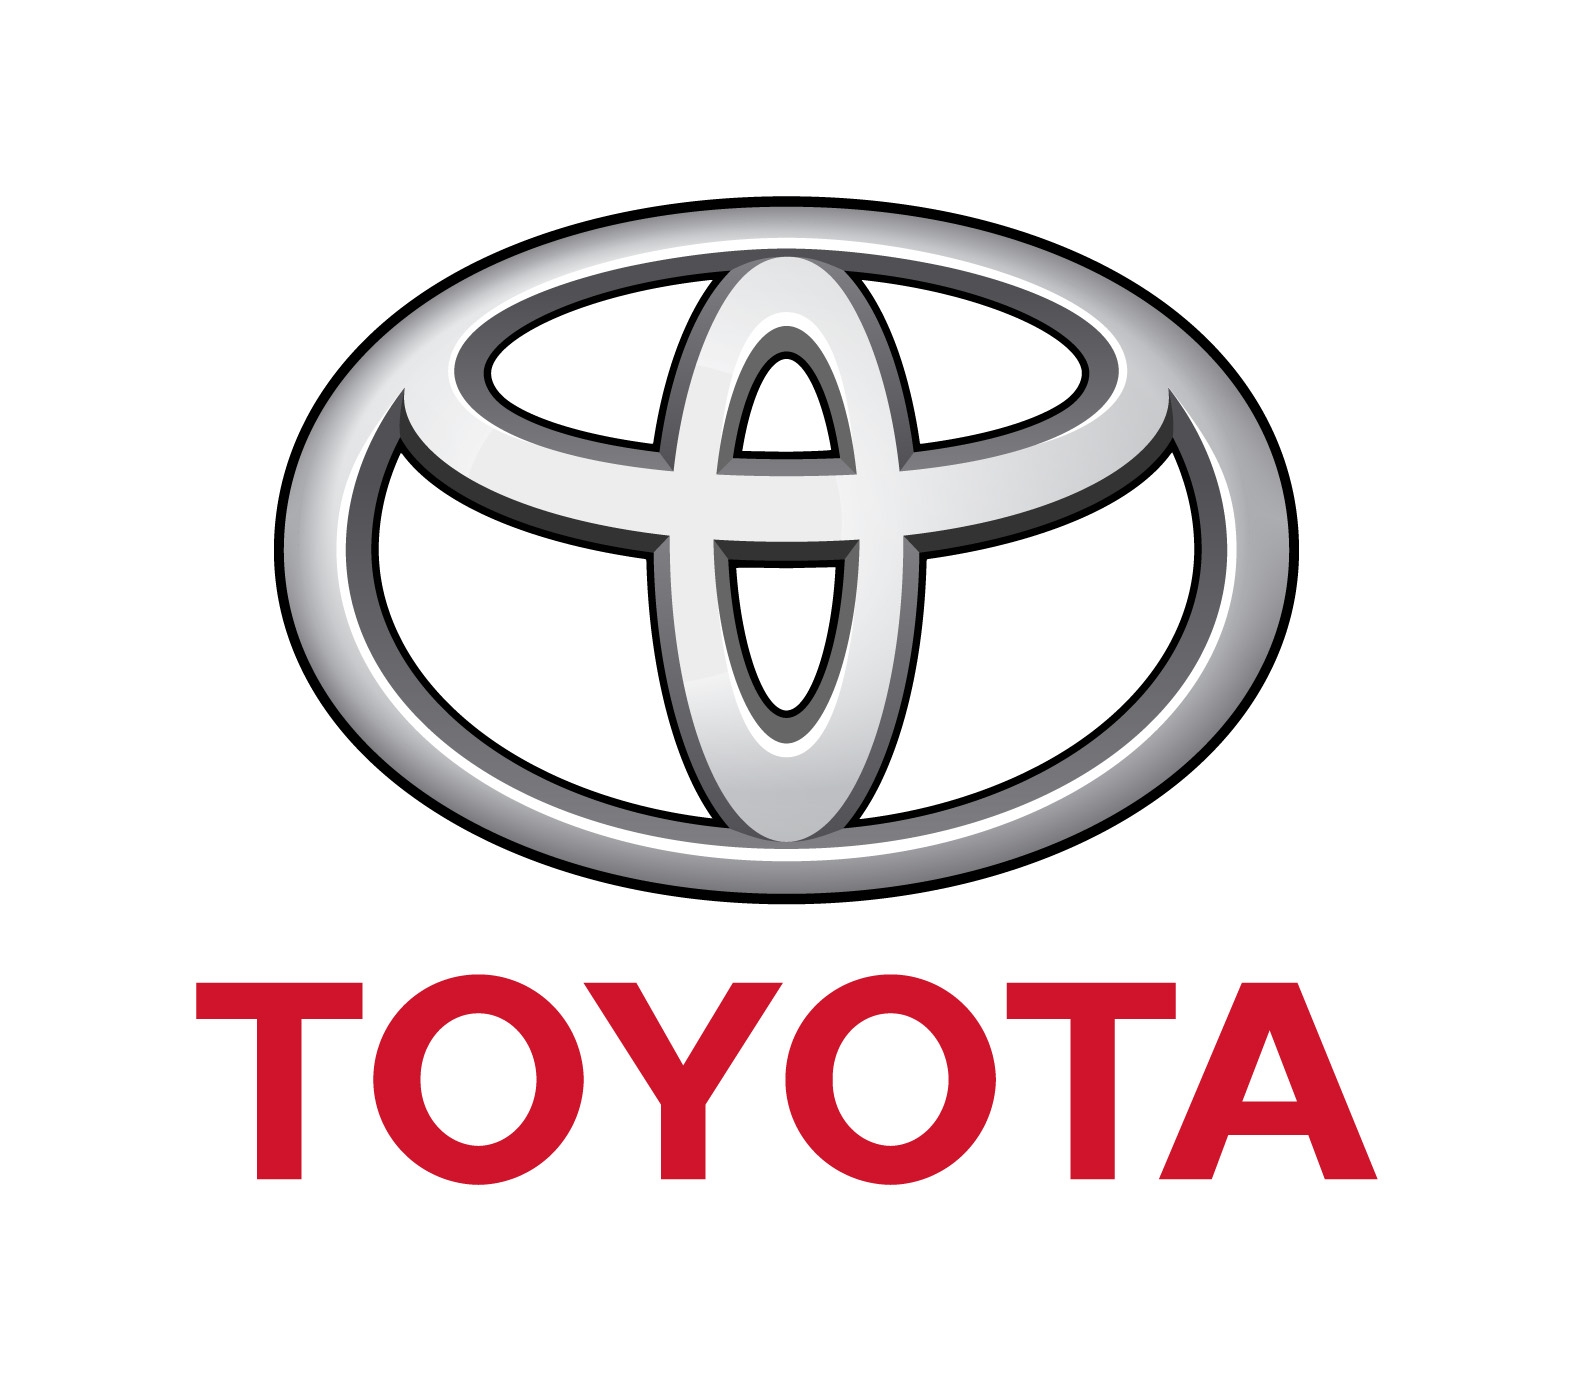 toyota logo meaning #4